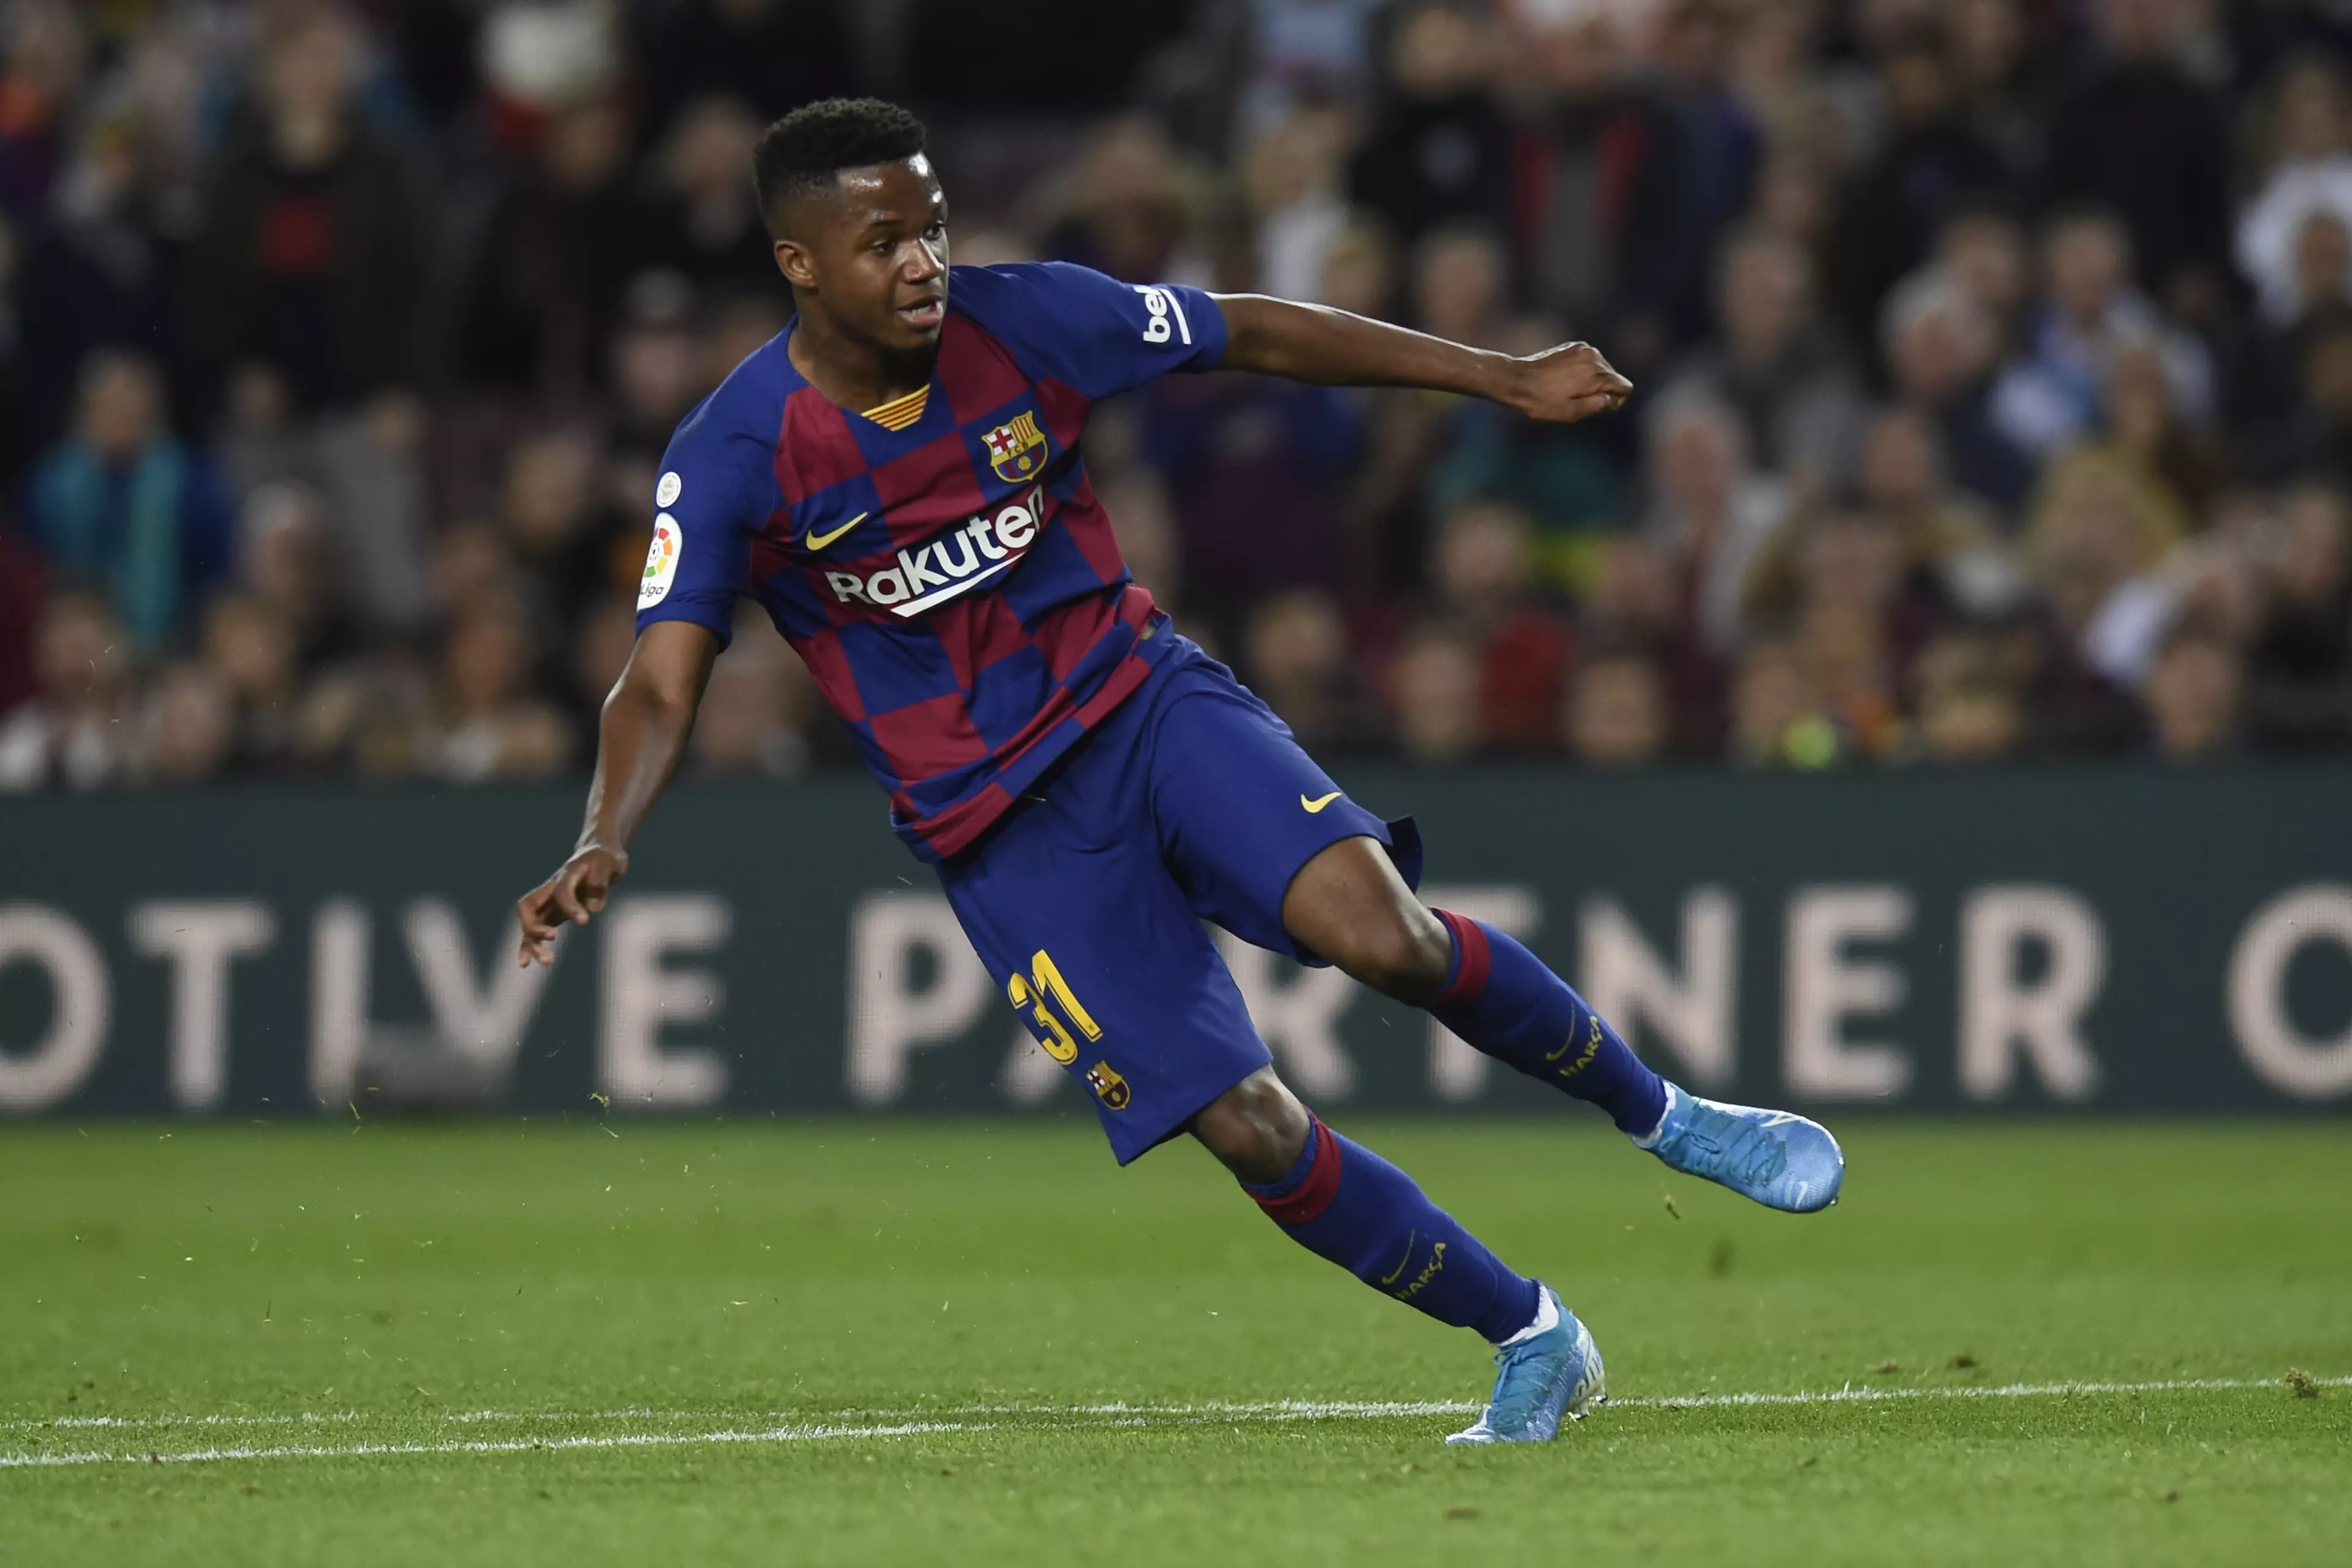 Fati has impressed at the Nou Camp already. Image: PA Images